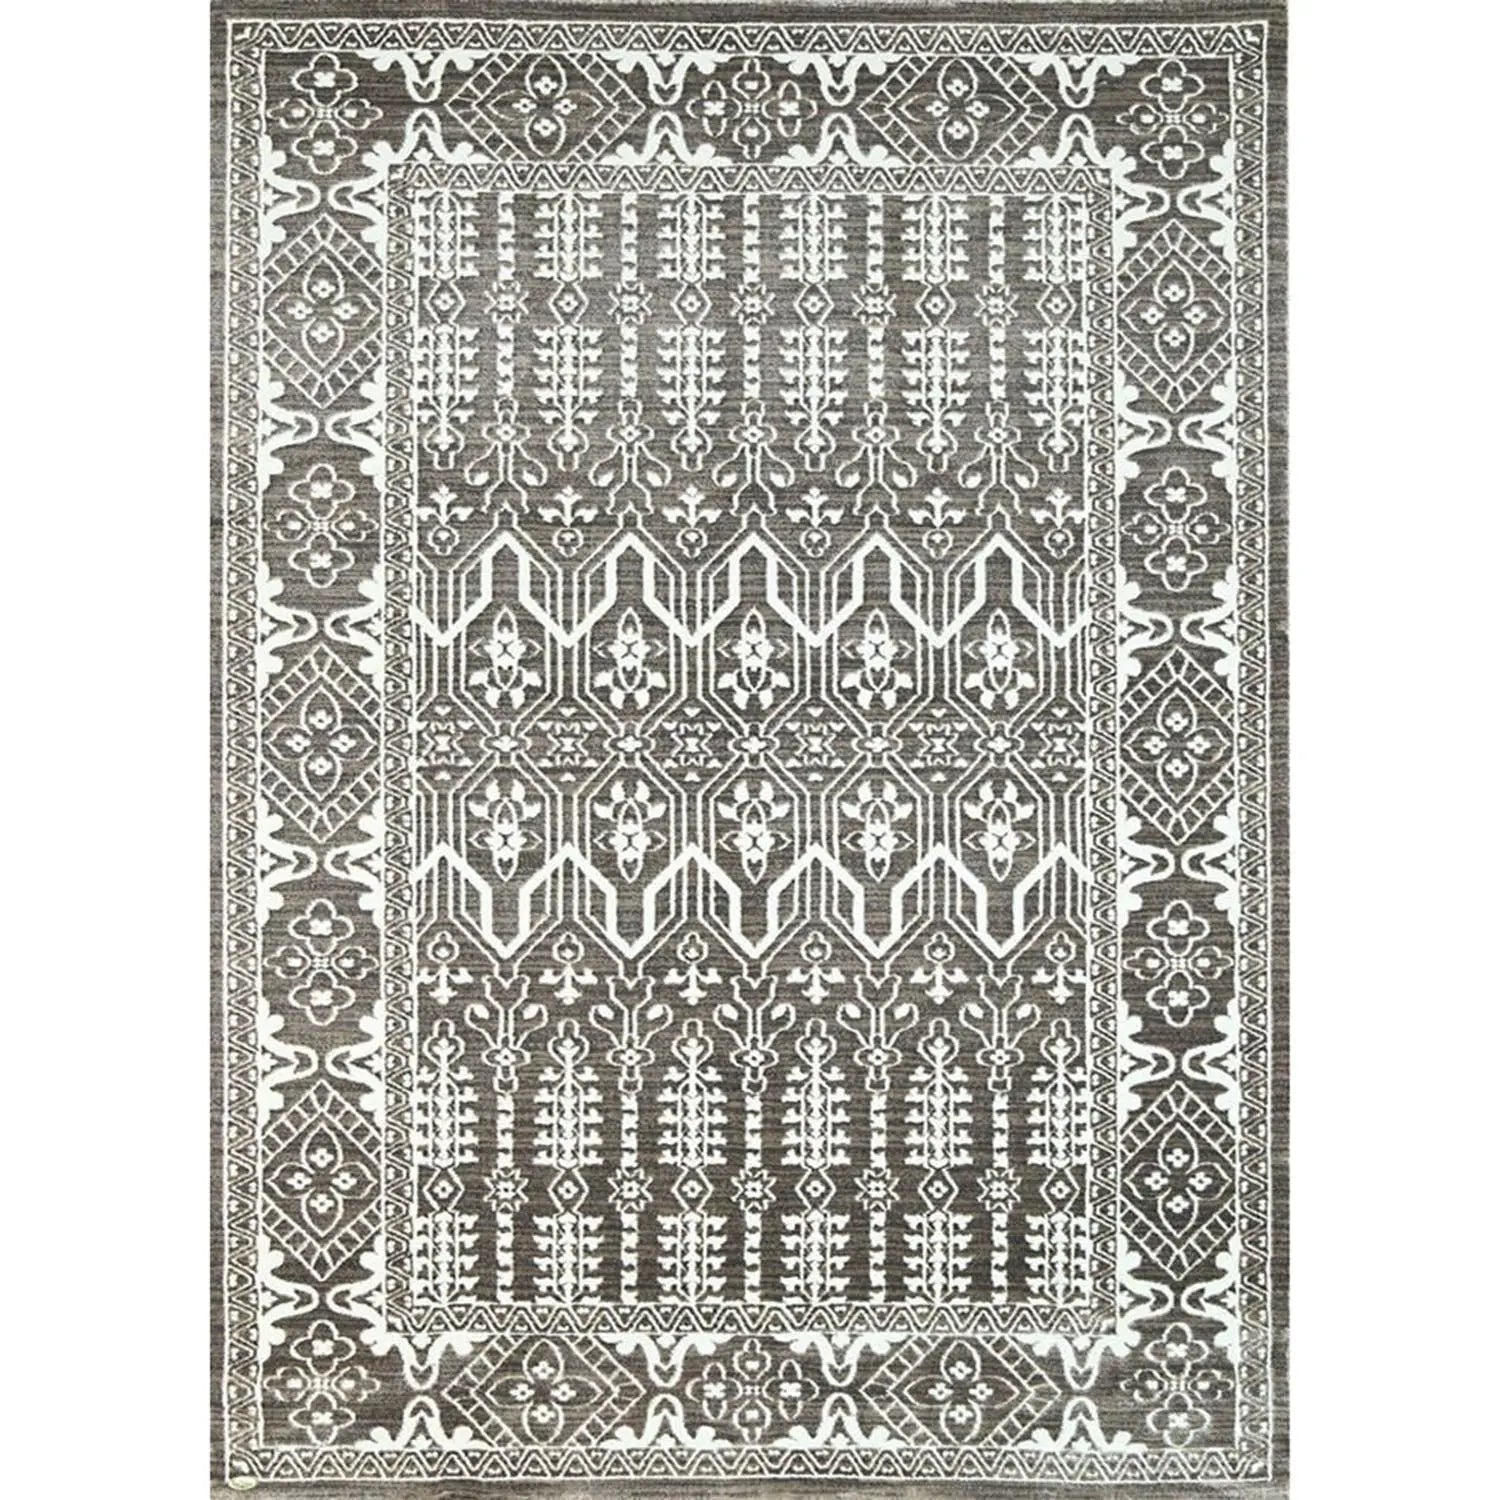 Pierre Cardin Sateen Traditional Border Designer Rug Brown - Rugs - Rugs a Million